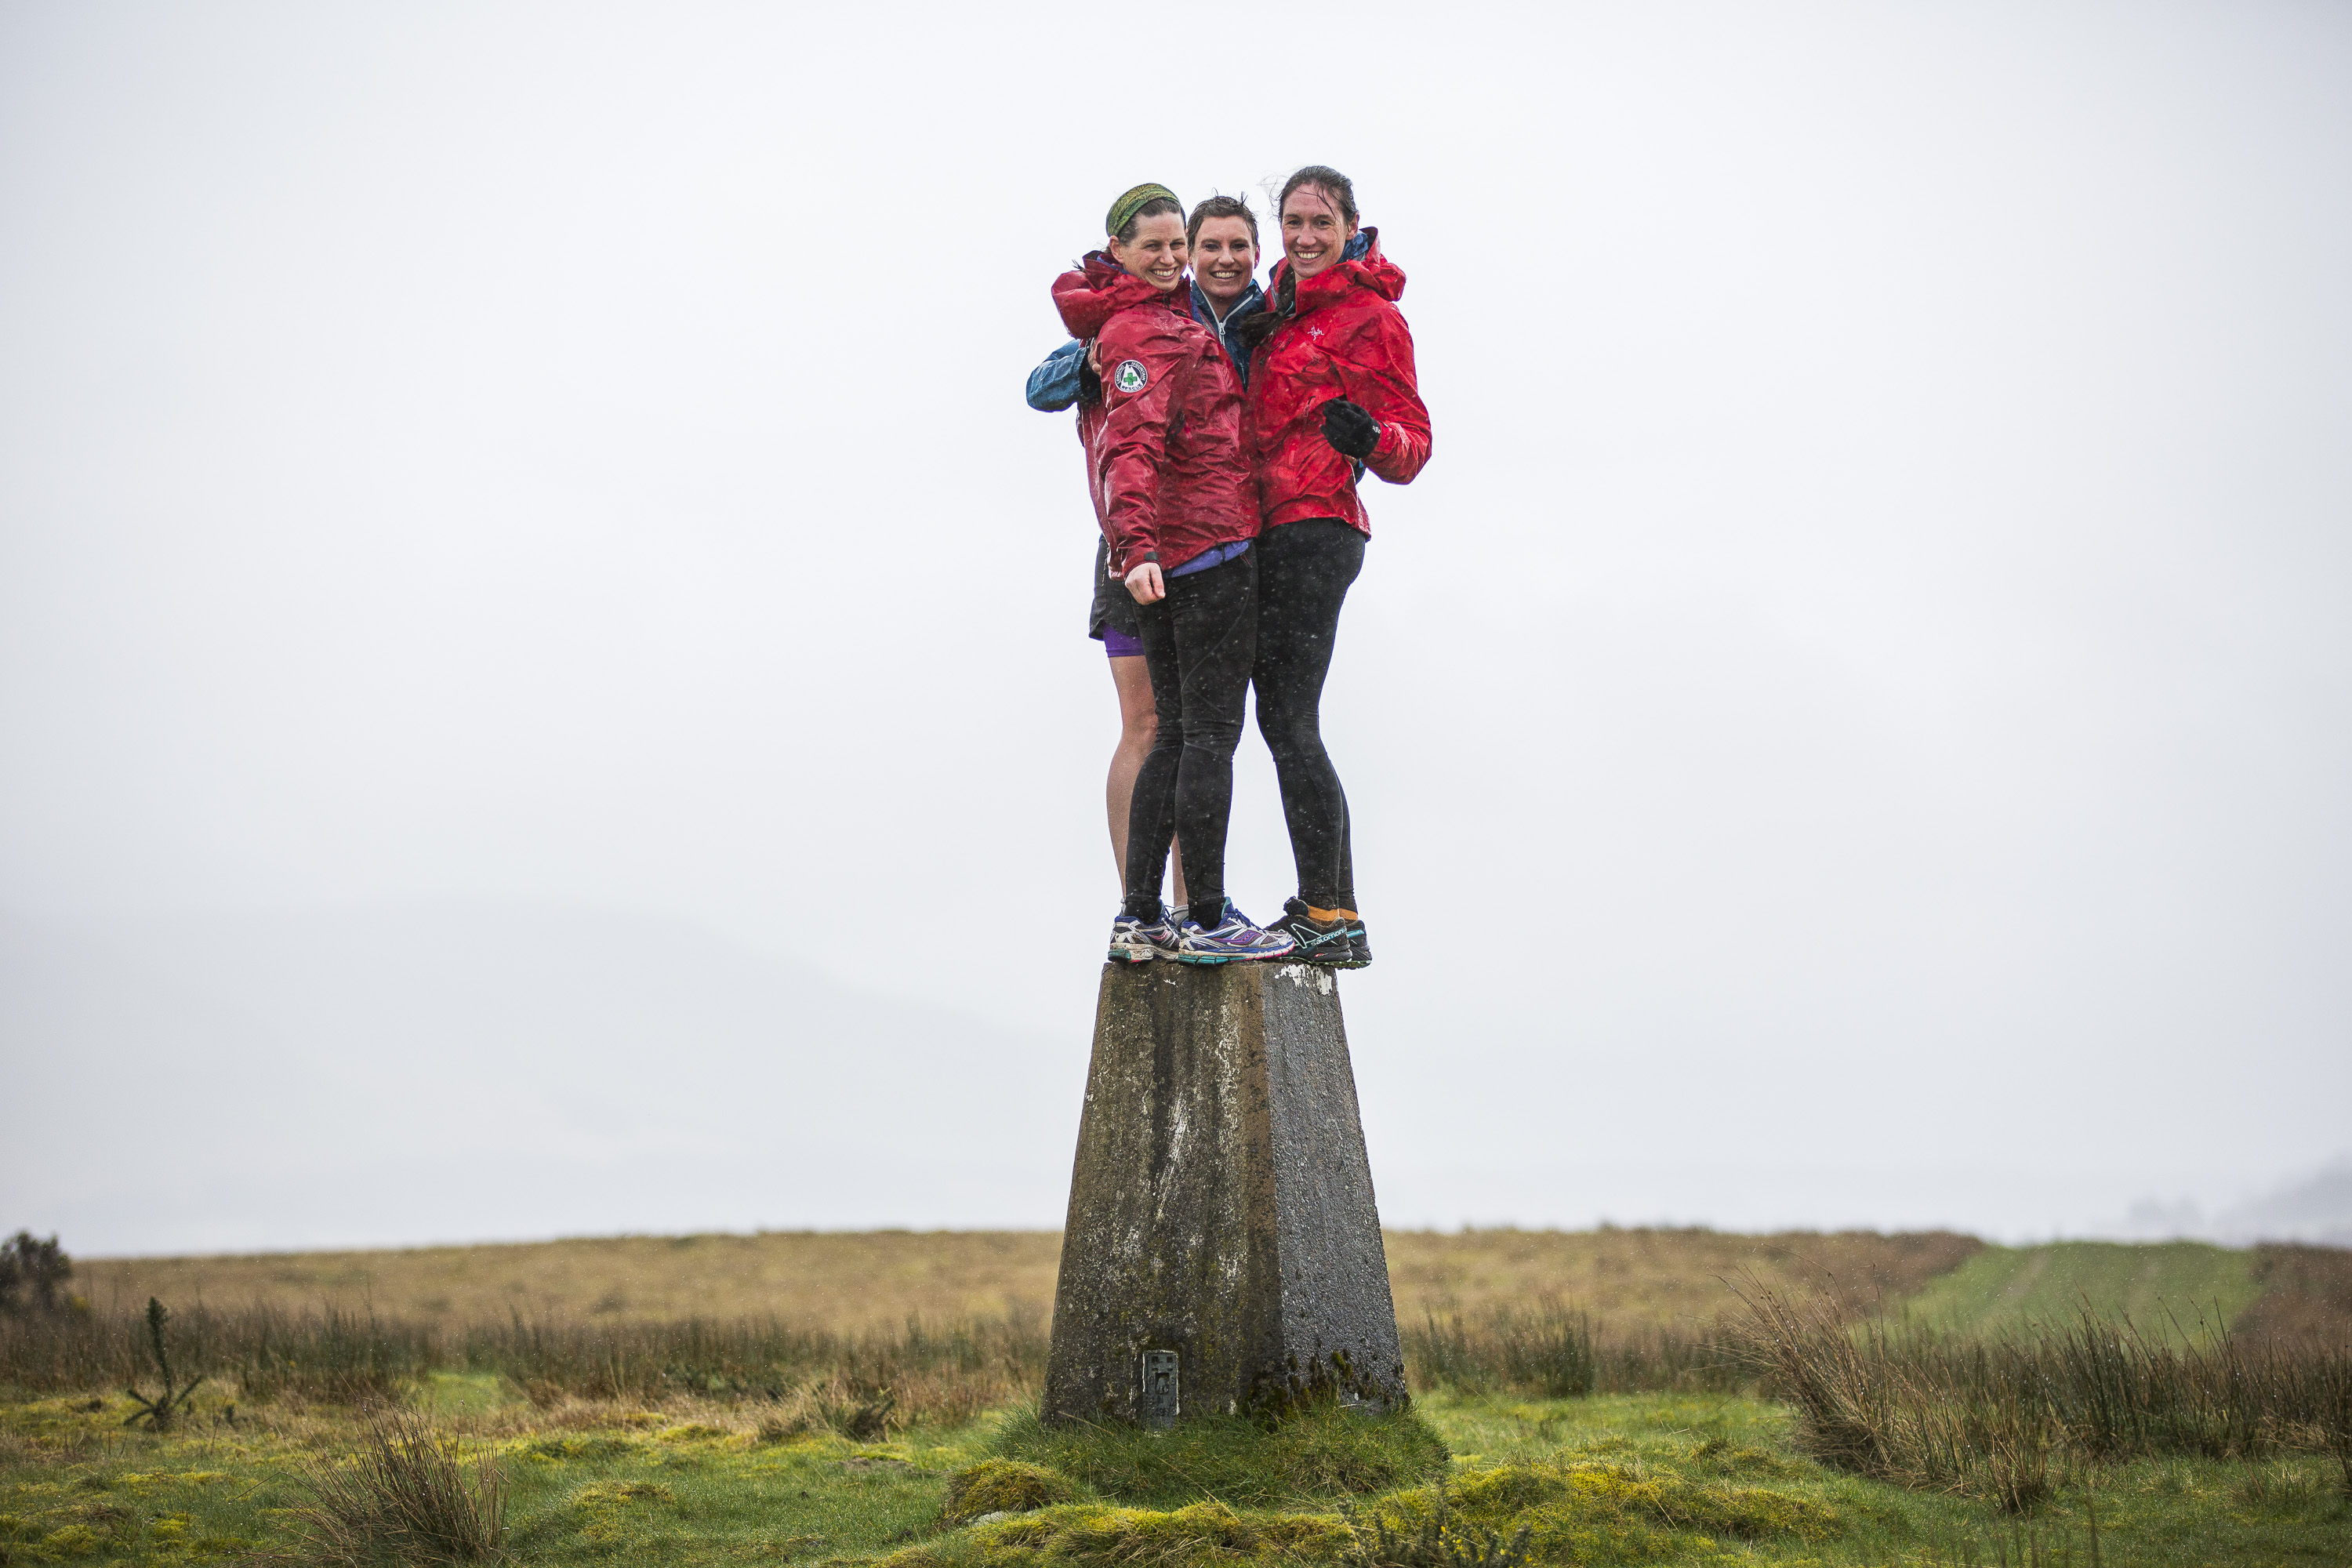 Jamie Aarons, Alex Berry and Jenny Allen who are runners are doing a trig point challenge on 6 April